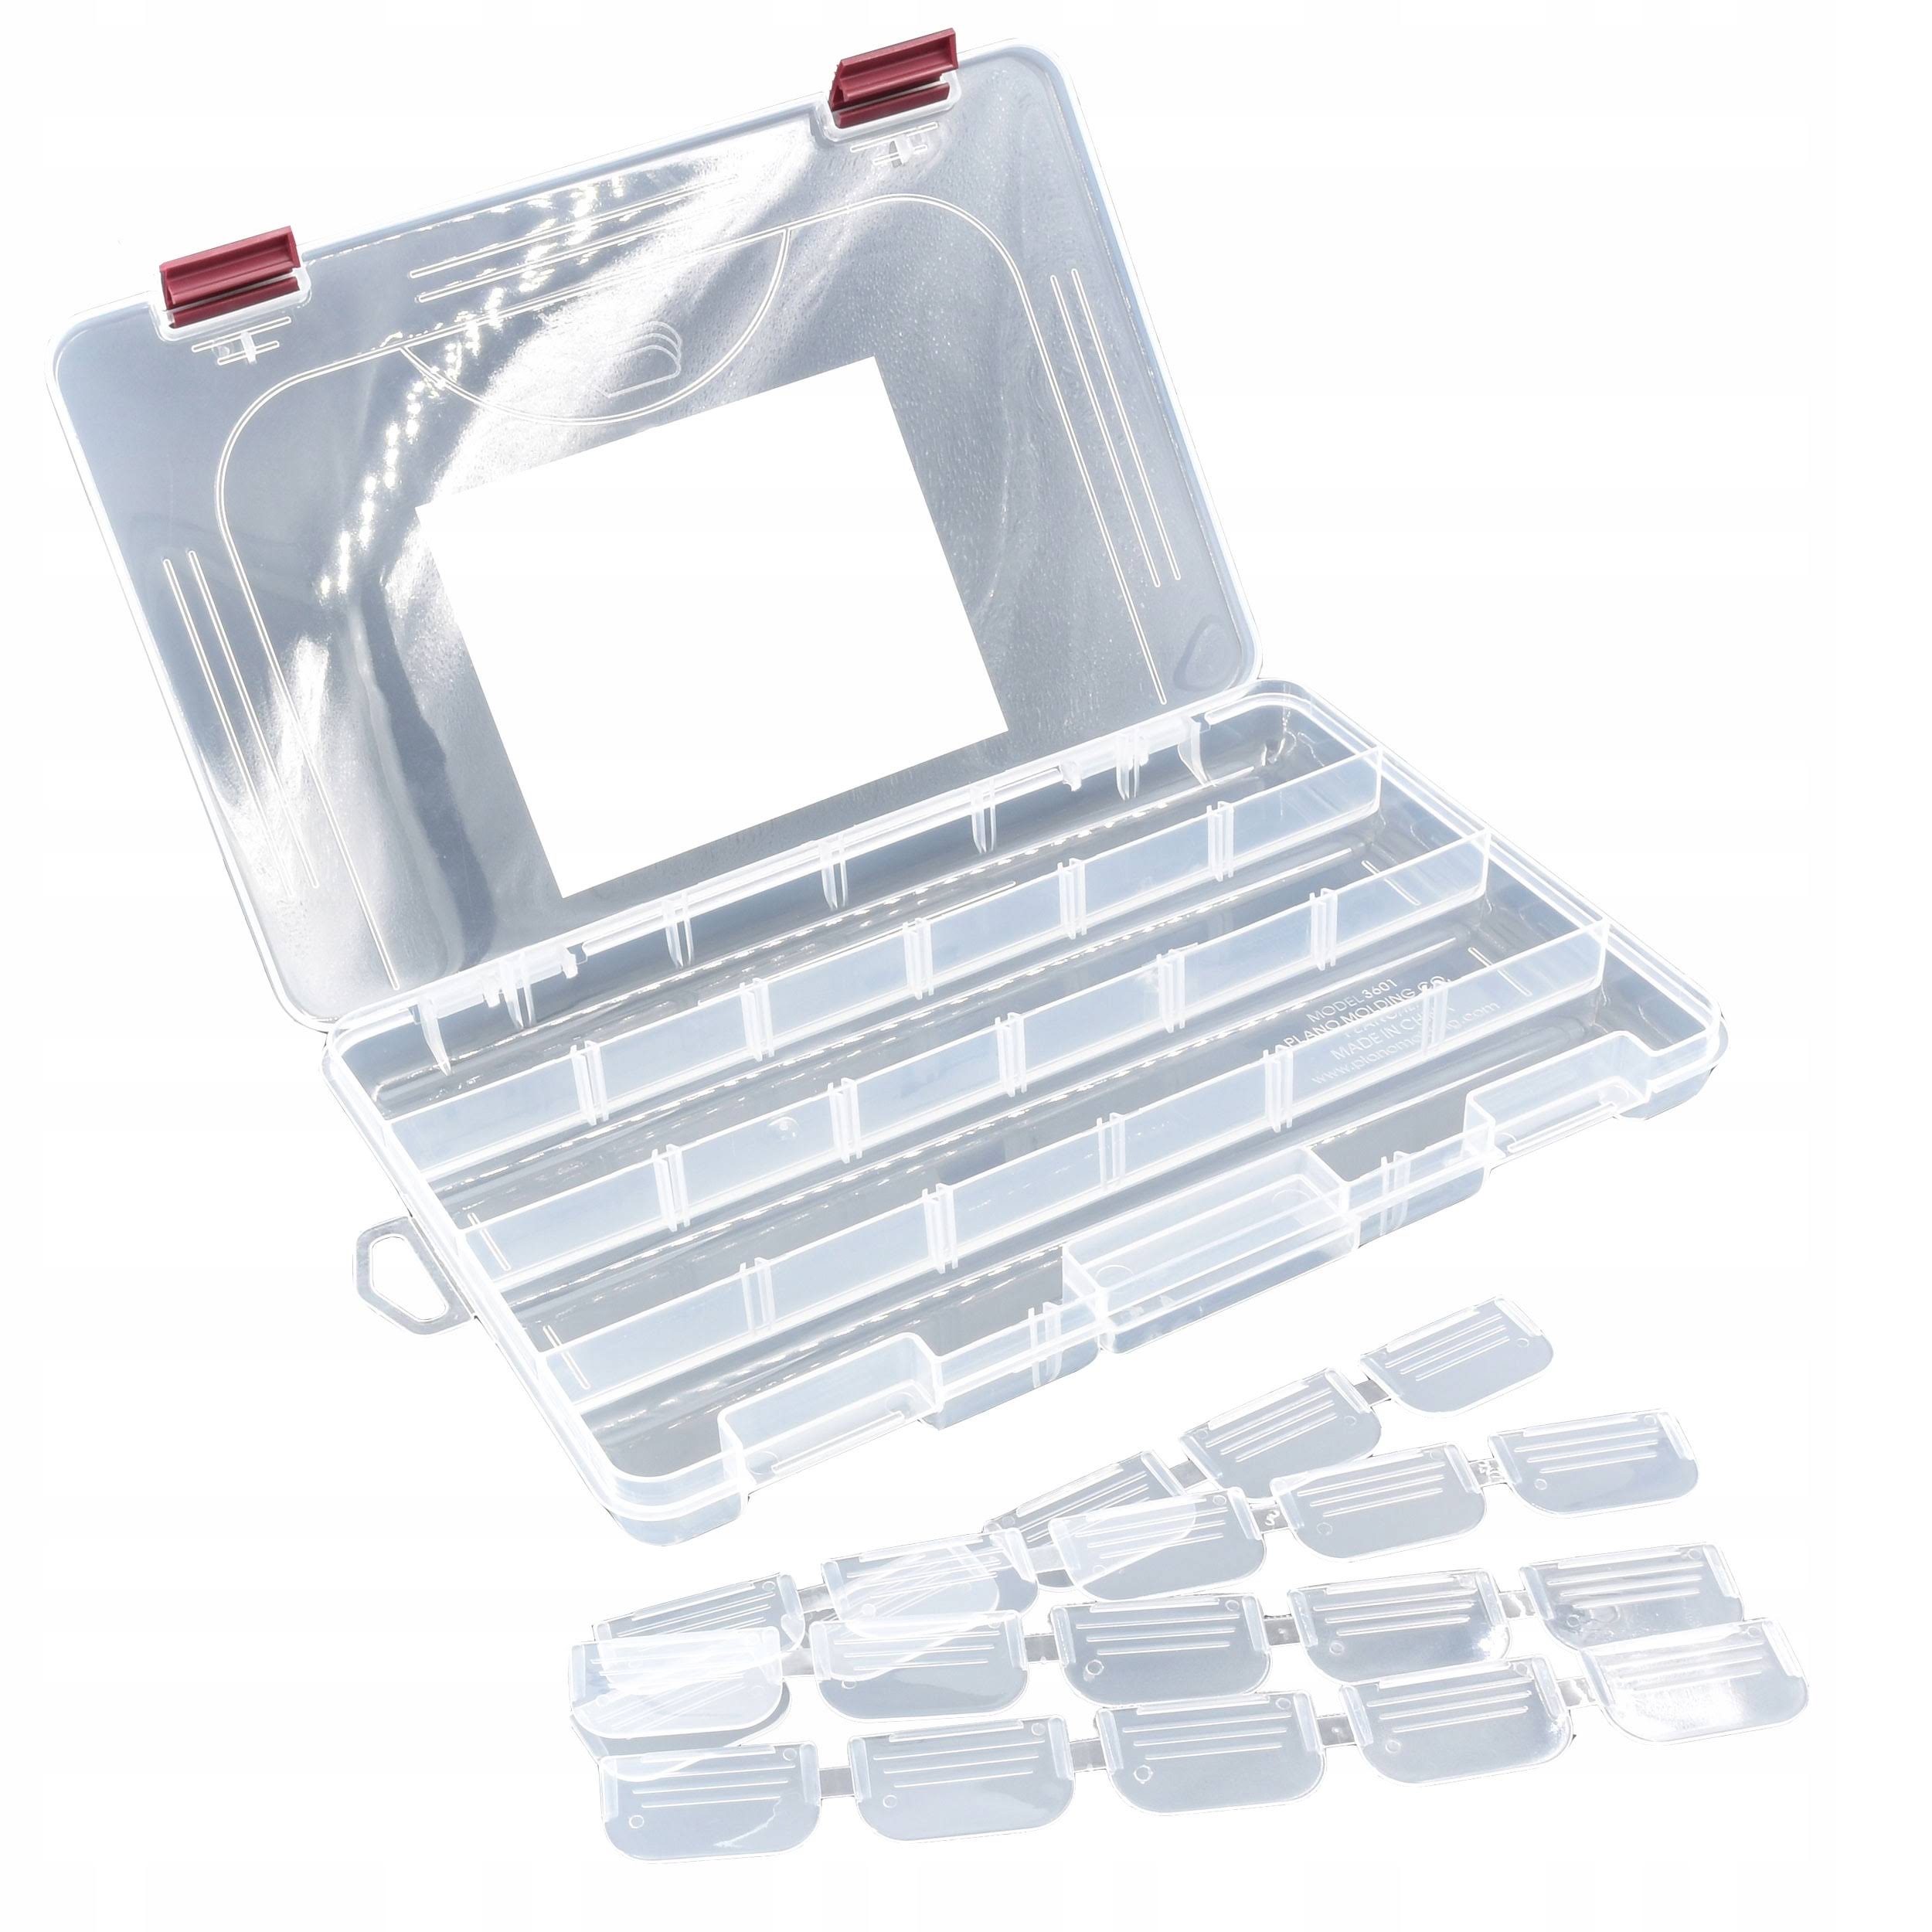 Plano 2-3601-00 Thin Stowaway - Clear, with Adjustable Dividers